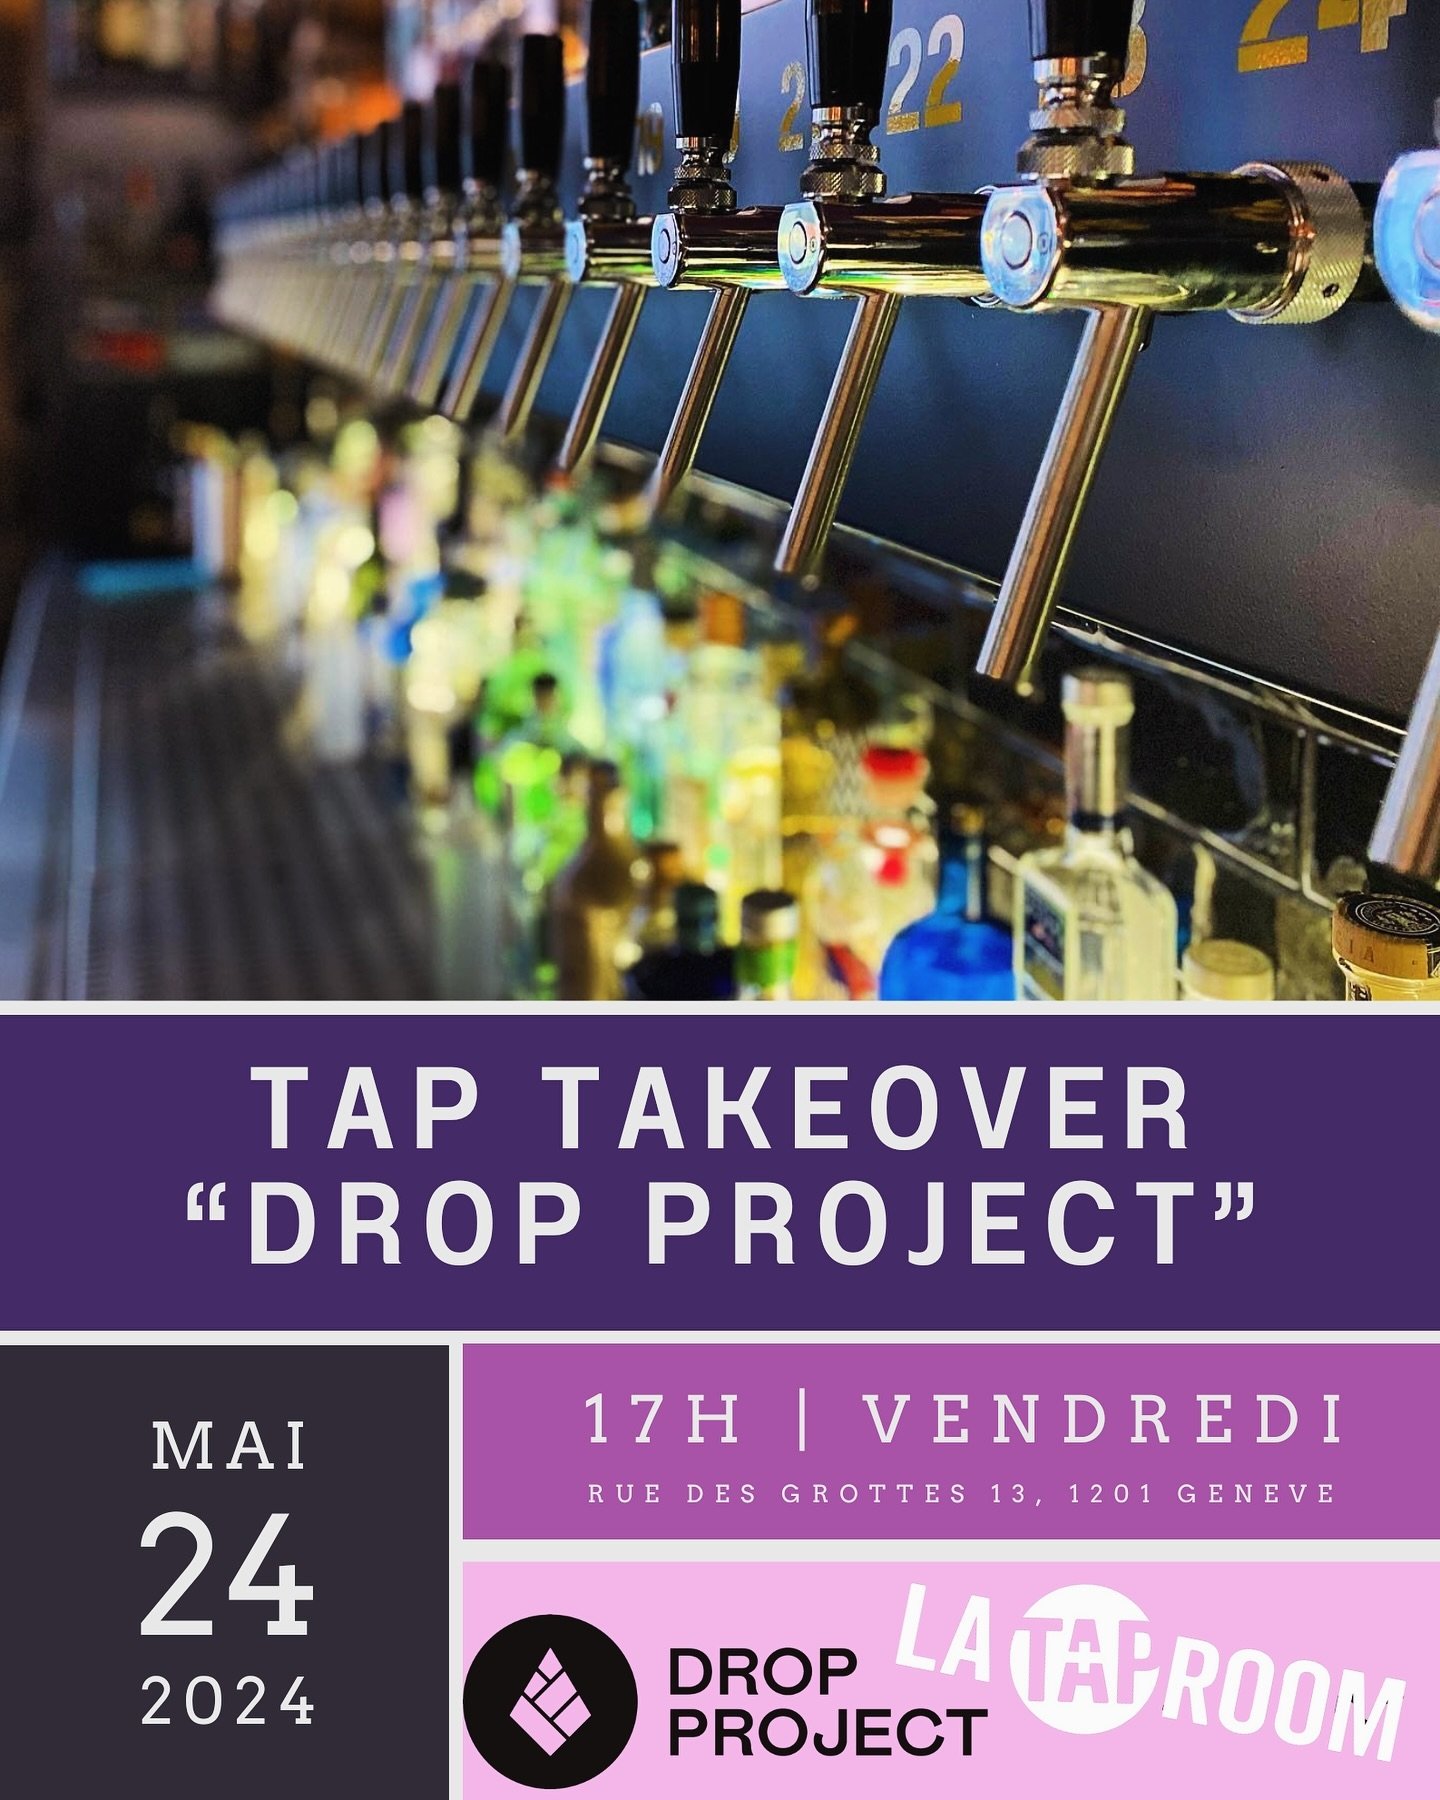 Hey everyone!! Get ready for an epic Tap Takeover on Friday May 24th, as Drop Project Brewery storms into the taproom 🙌🍻
They&rsquo;re bringing especially for you 8 handpicked brews, from wild experimental pale ales to delightful goses, and of cour